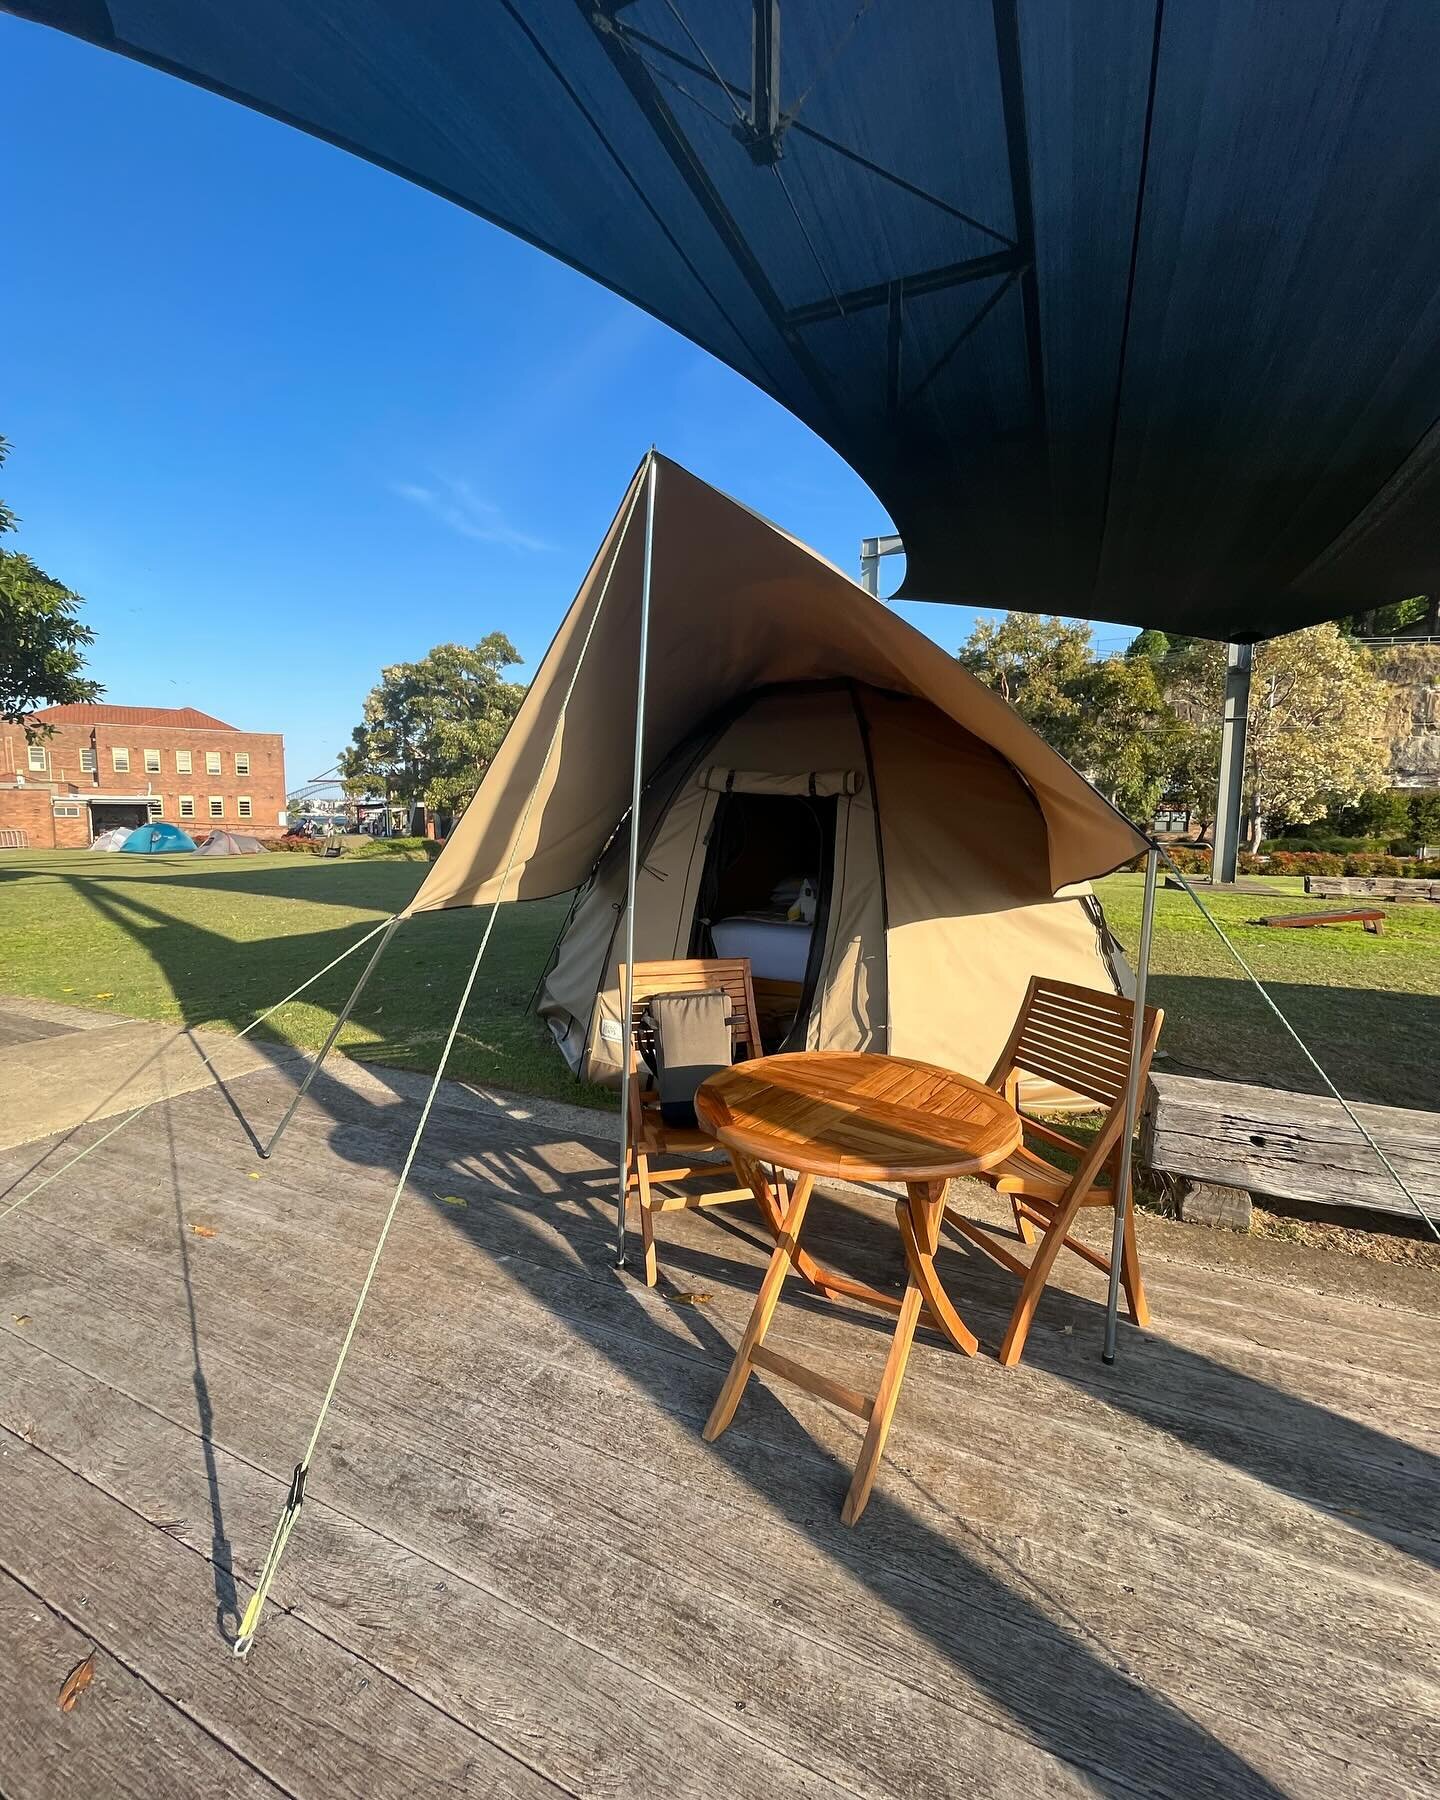 Stayed on Cockatoo Island in one of their deluxe tents for my birthday. Rivercat from Parramatta was the way to go! #cockatooisland #sydney #2023travels